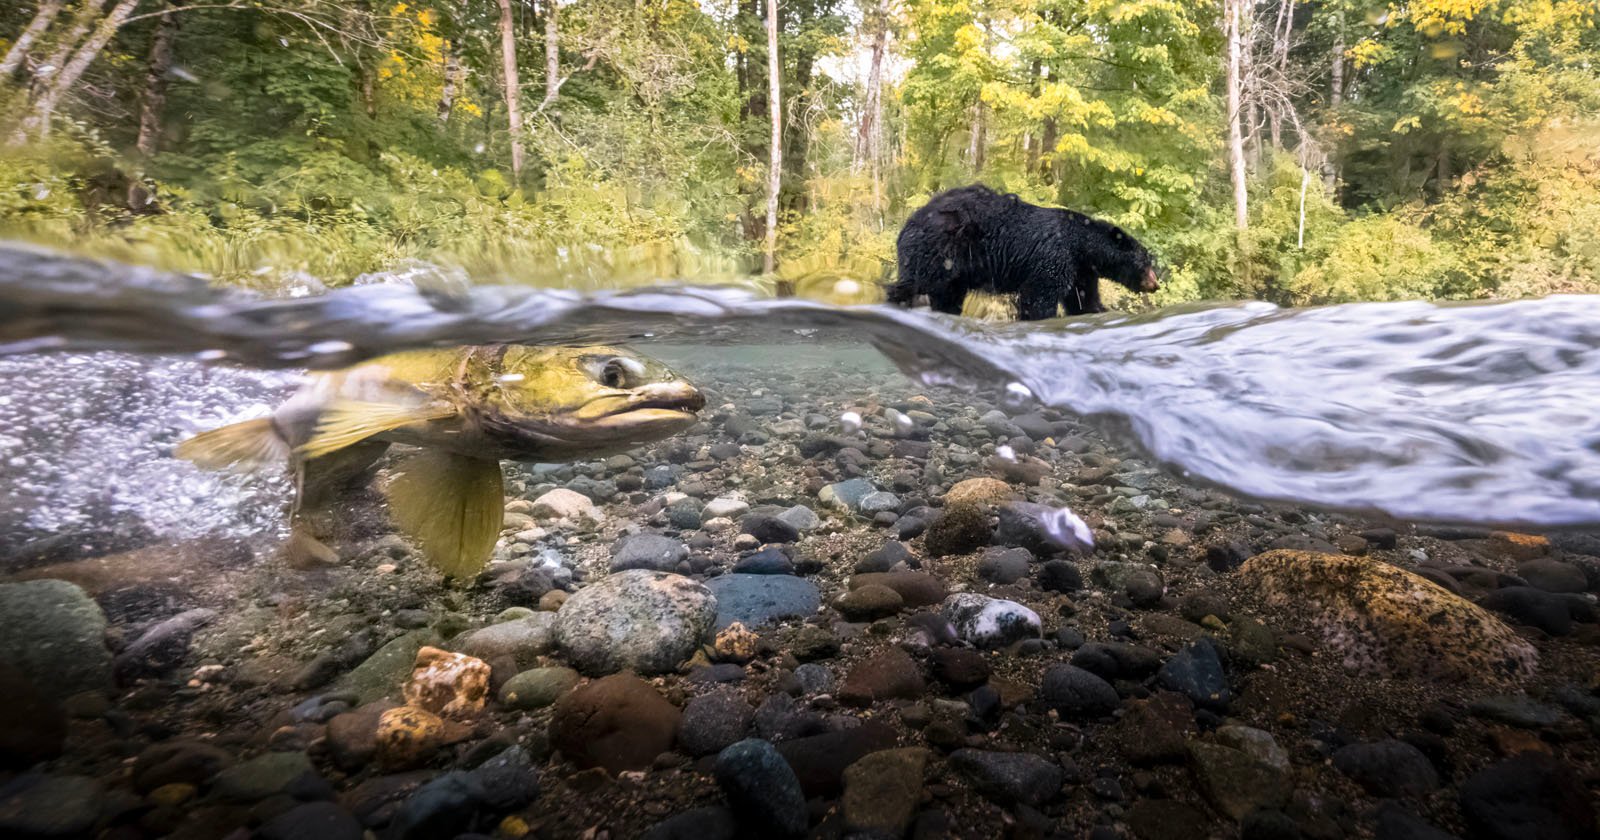 Bear and Salmon Pictured Together in Canadas Best Nature Photos 2023